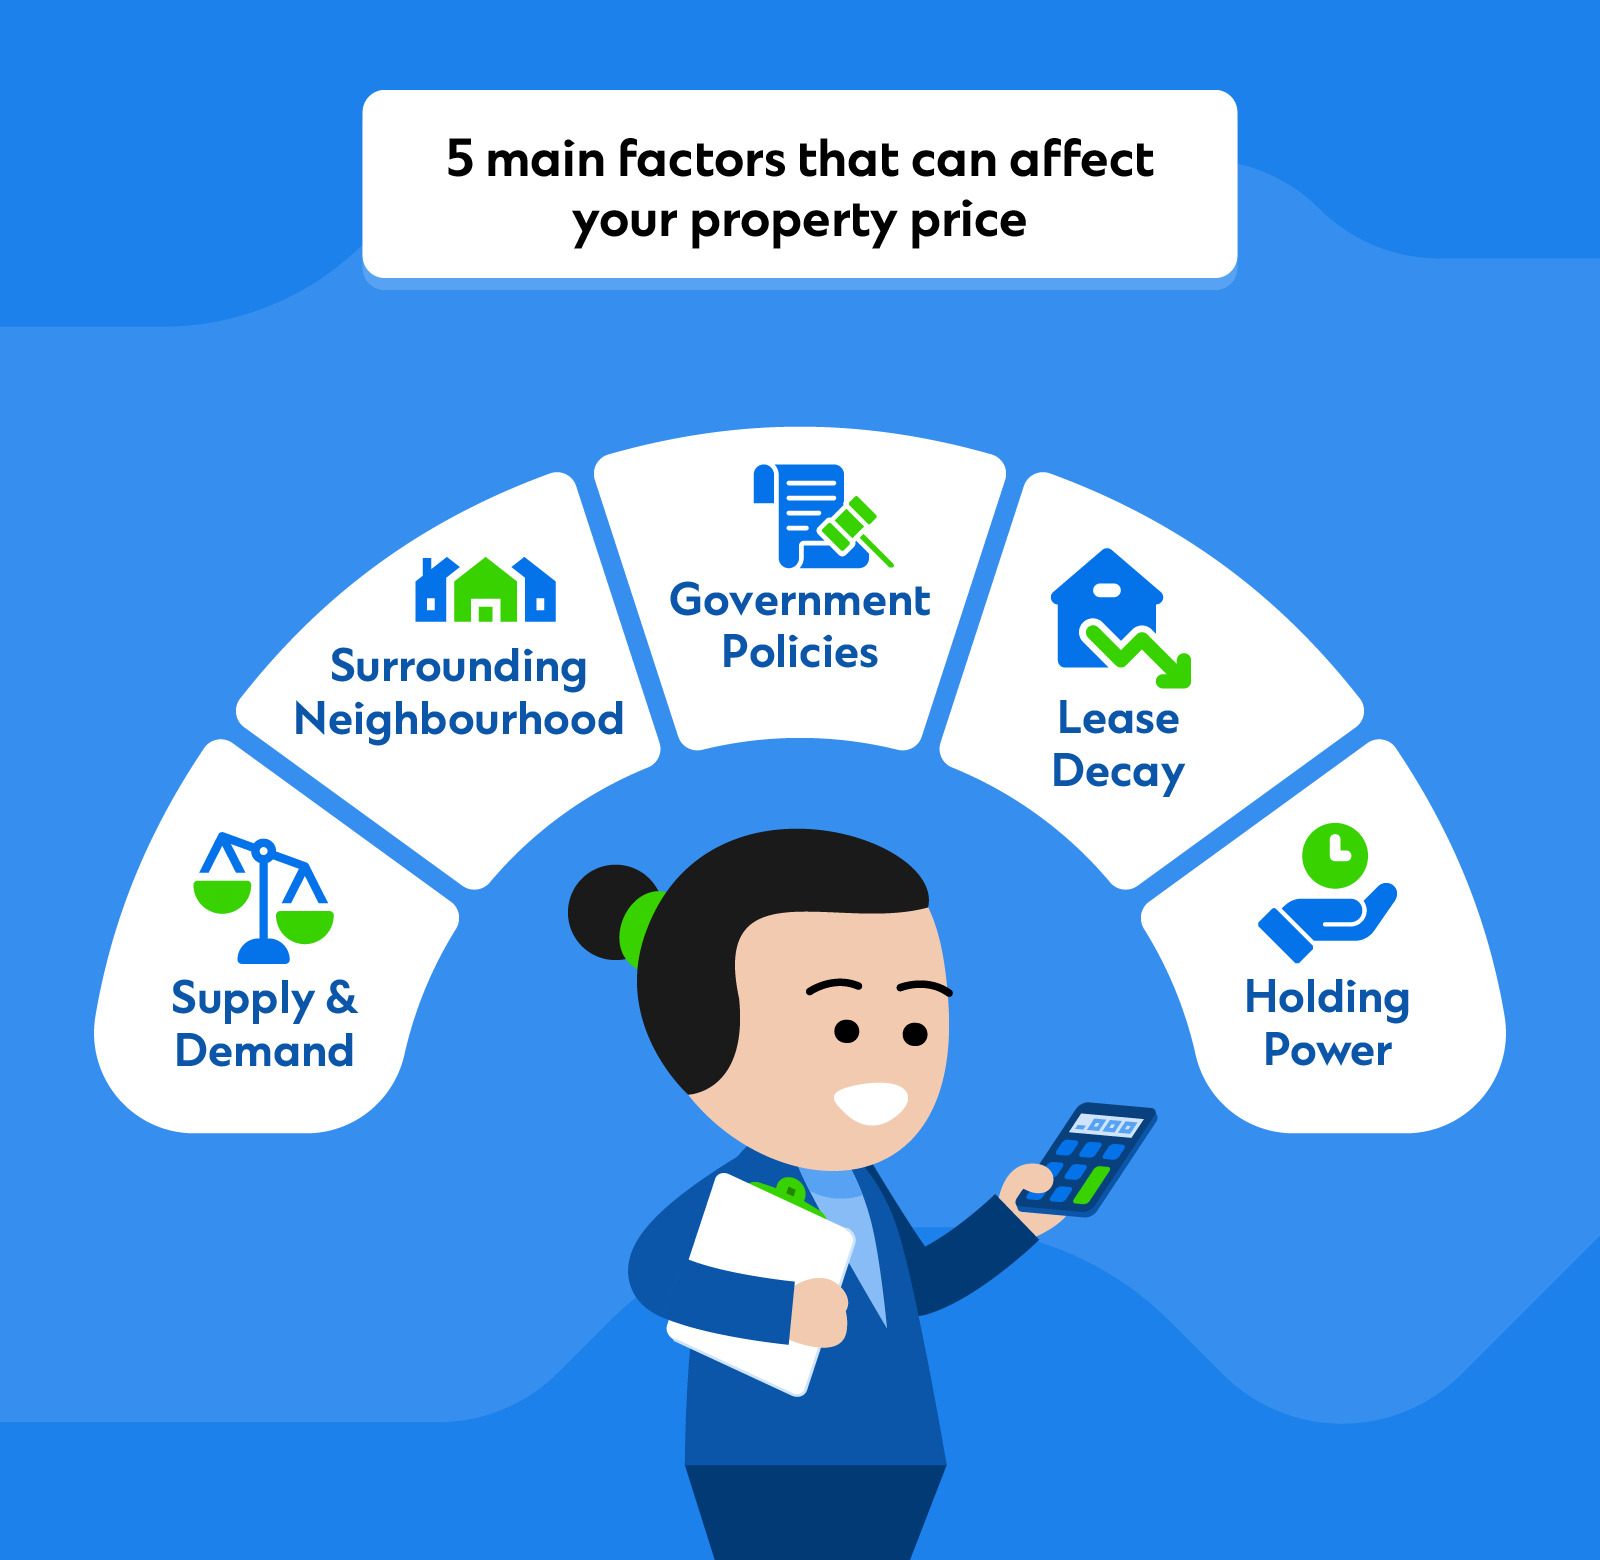 Some main factors affecting property prices